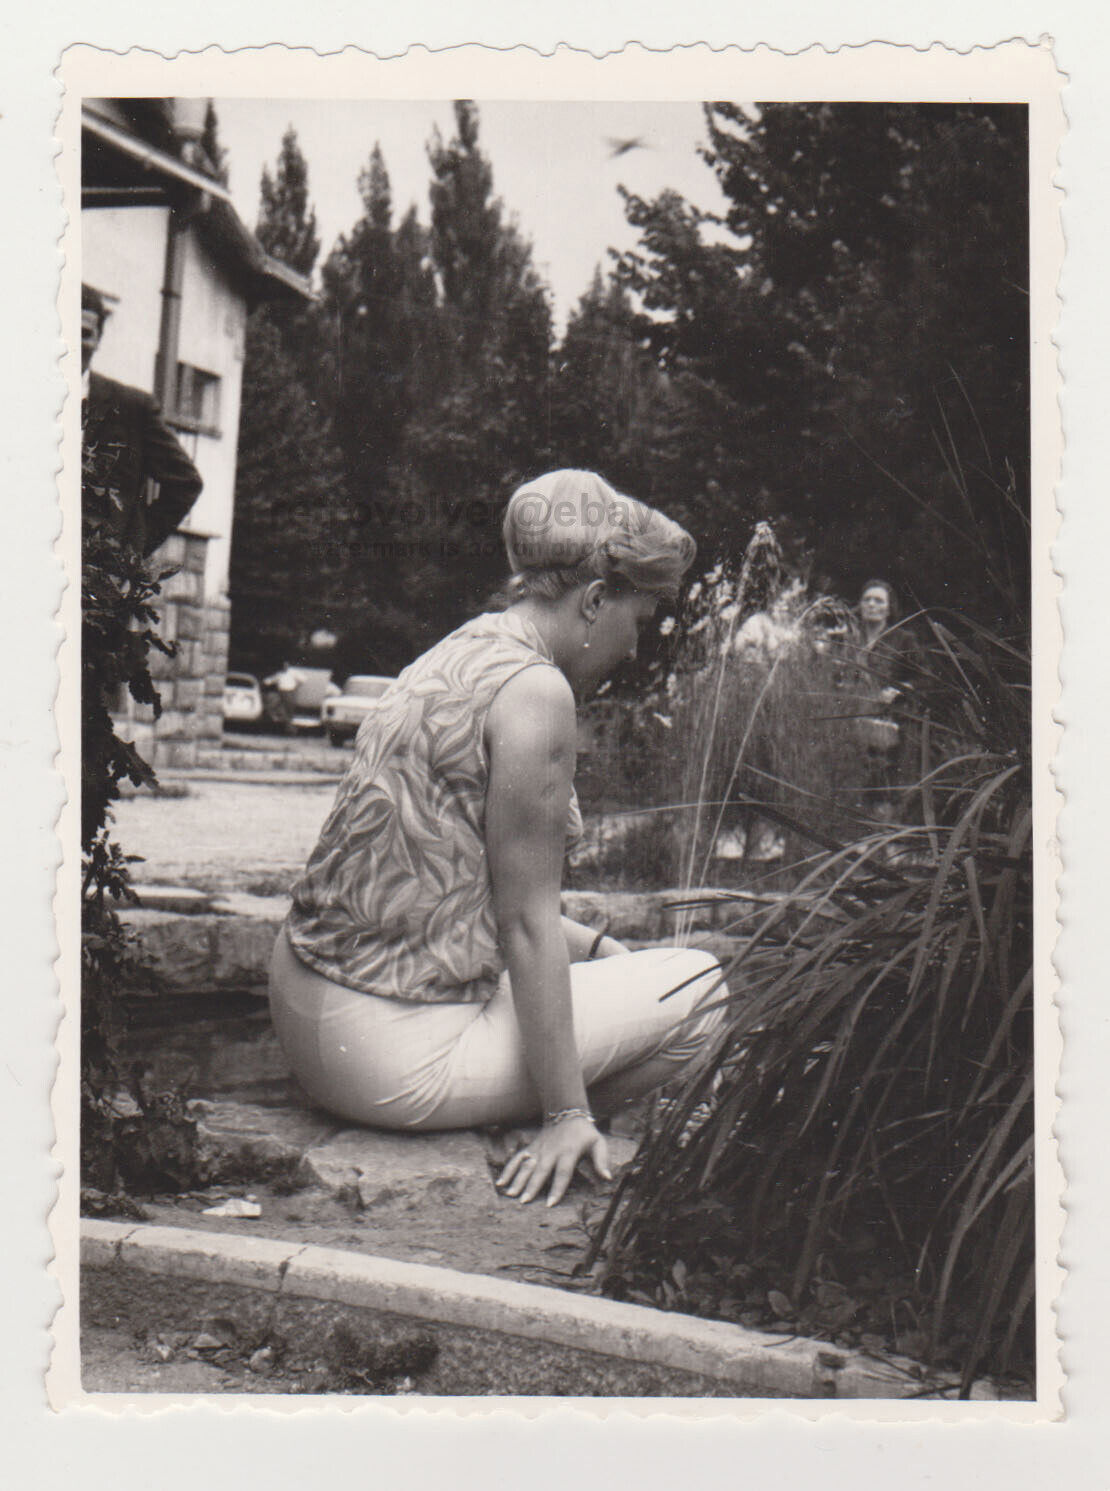 Pretty Attractive Young Woman Lady Secret Snapshot Unusual Nice Vintage Photo